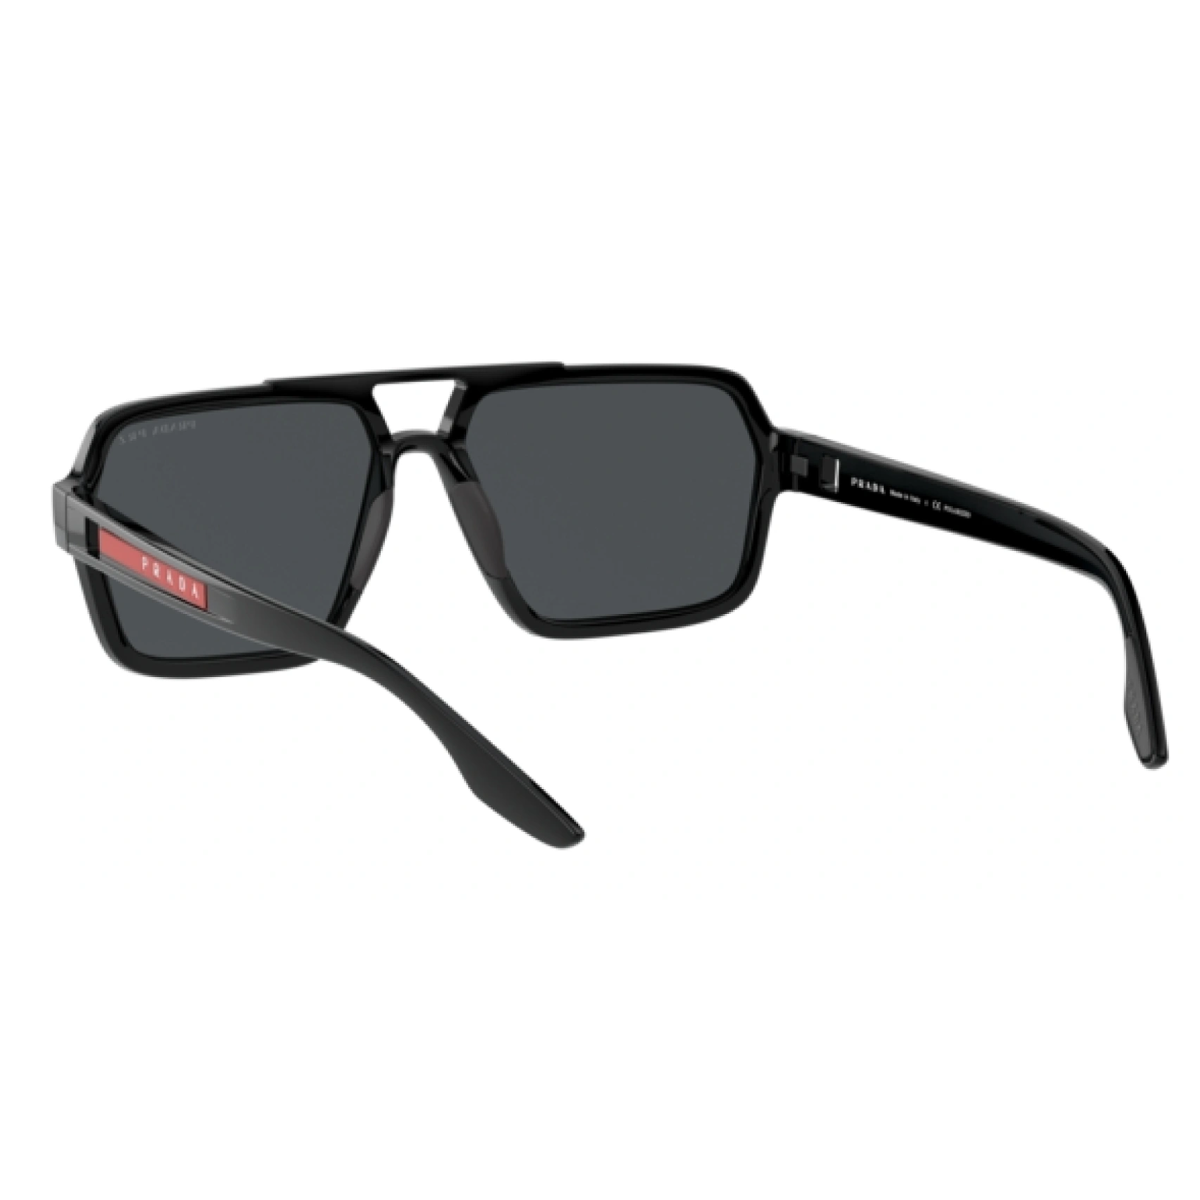 "Elevate your style with Prada SPS 01X 1AB-02G square sunglasses for men from Optorium. These trendy shades are ideal for both men and women seeking stylish eyewear. Enjoy free shipping!"